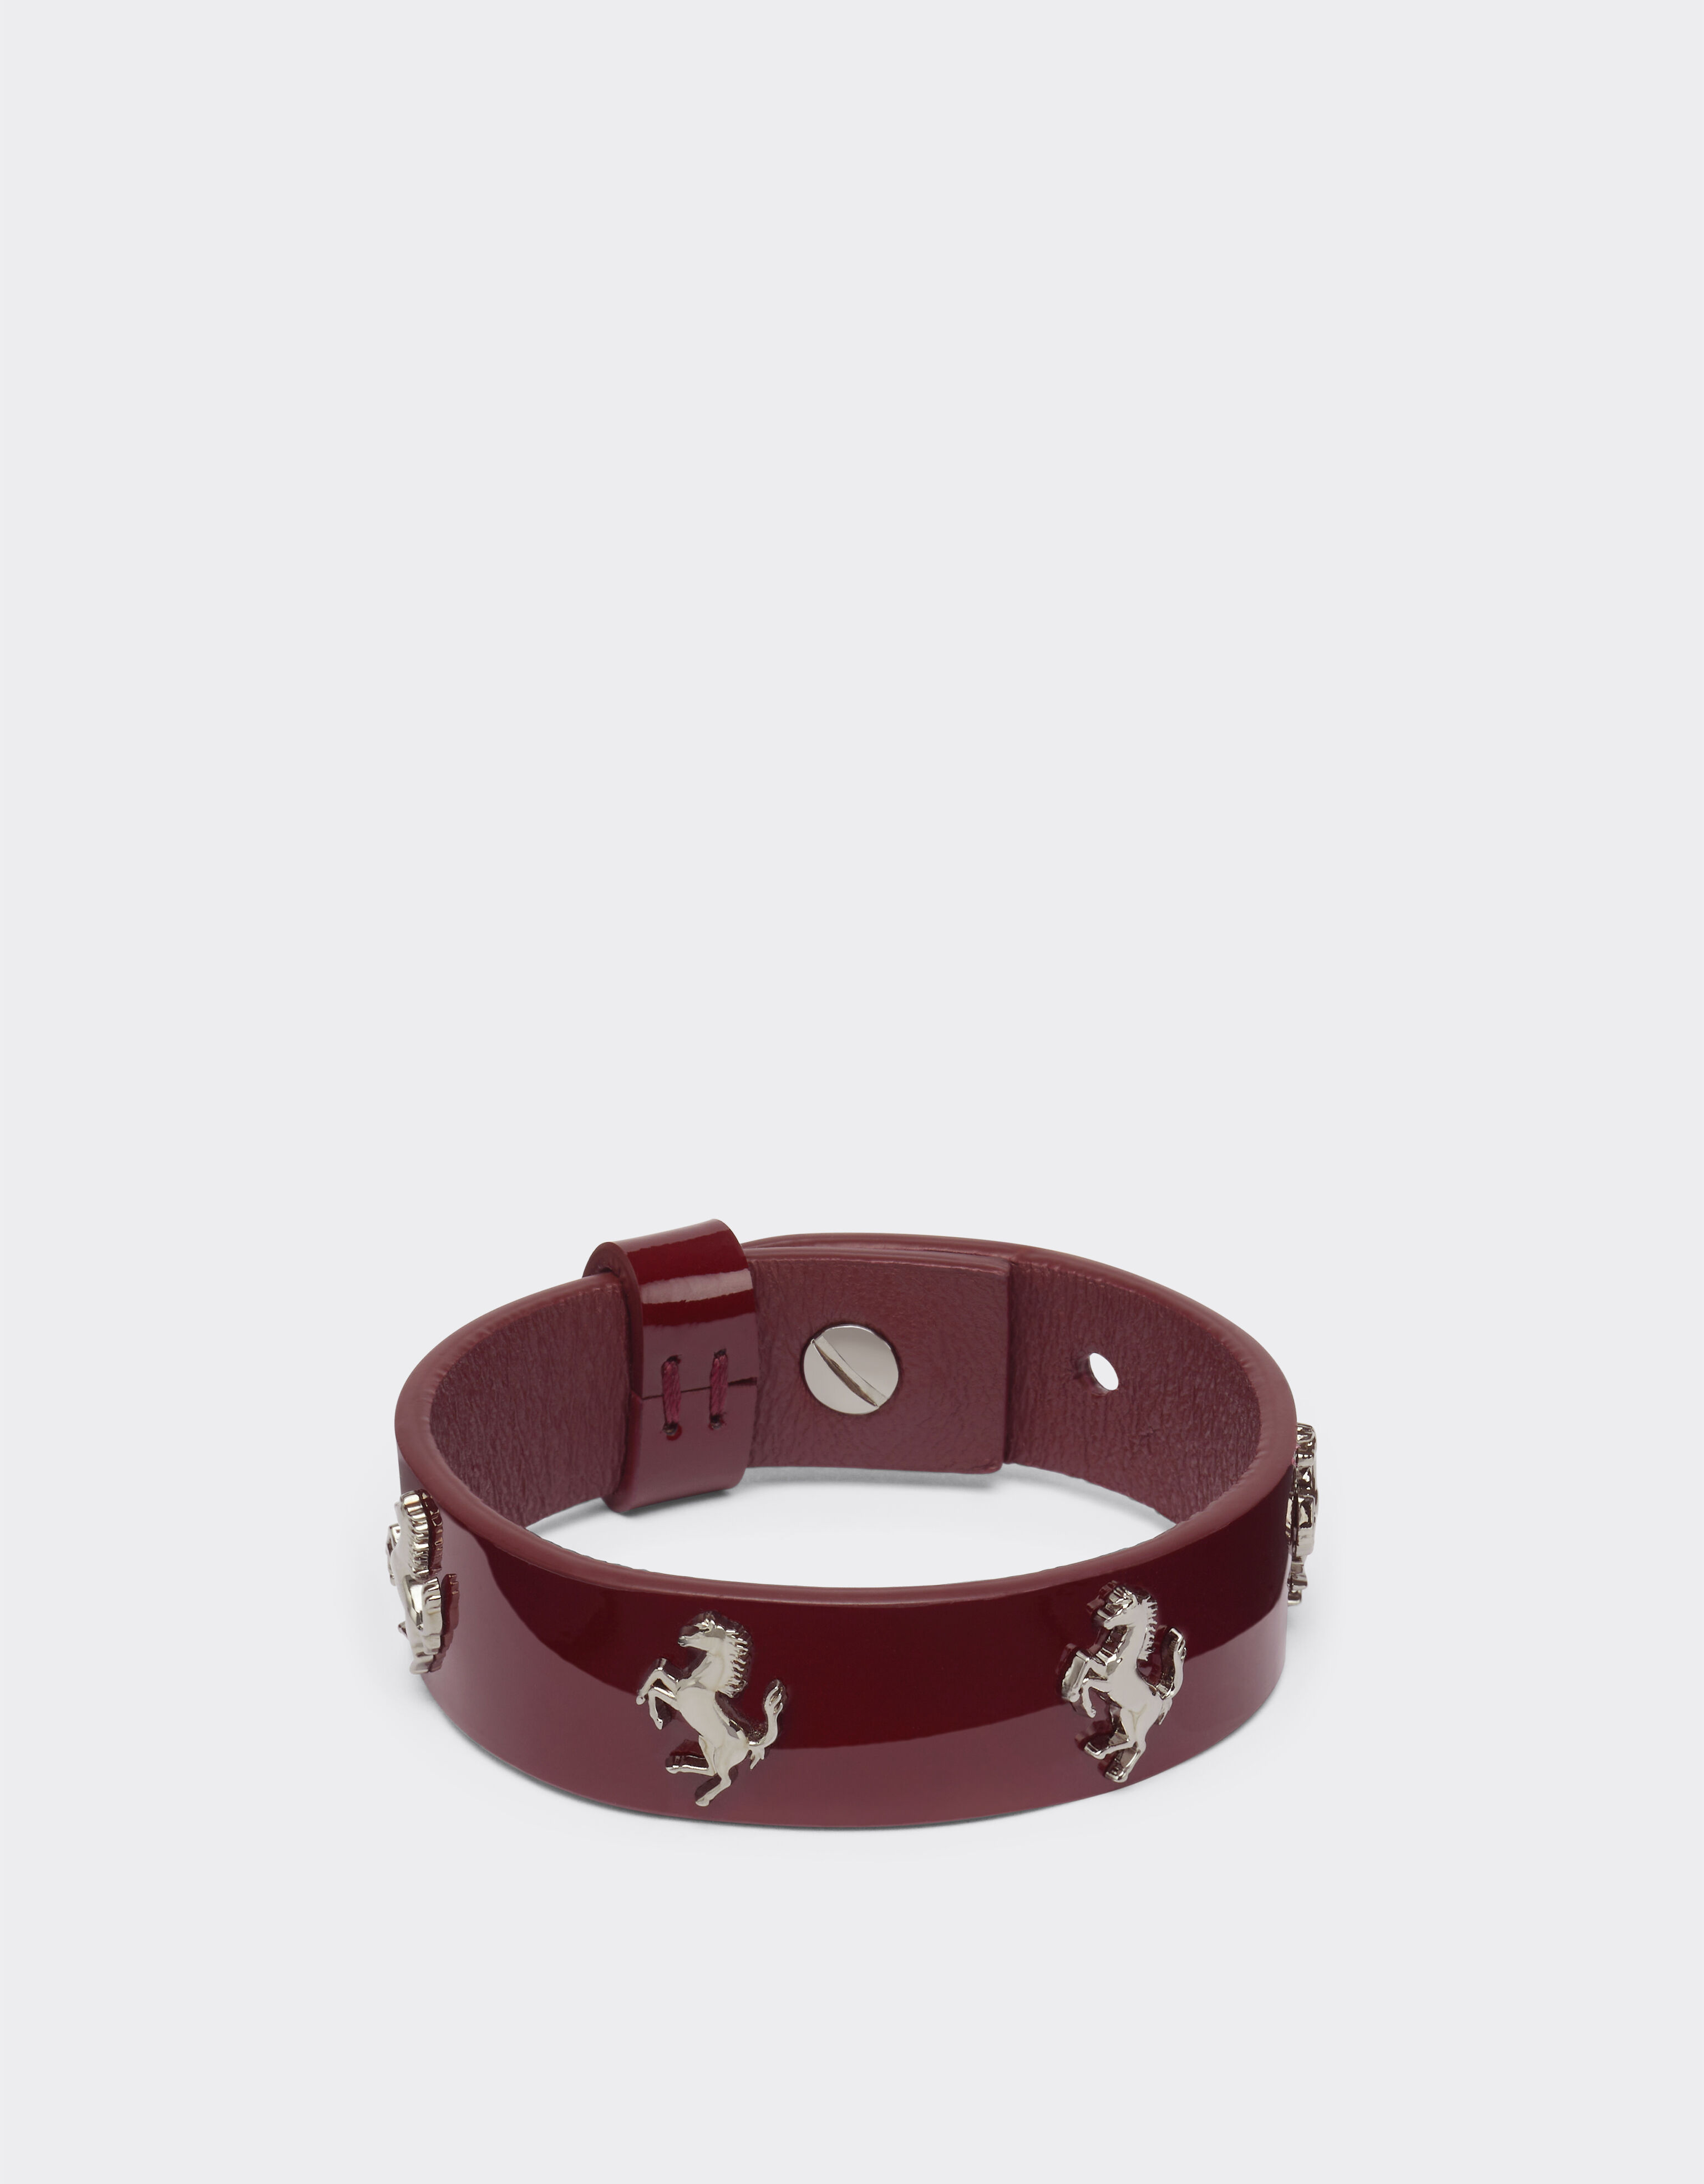 Ferrari Patent leather bracelet with studs Charcoal 20014f